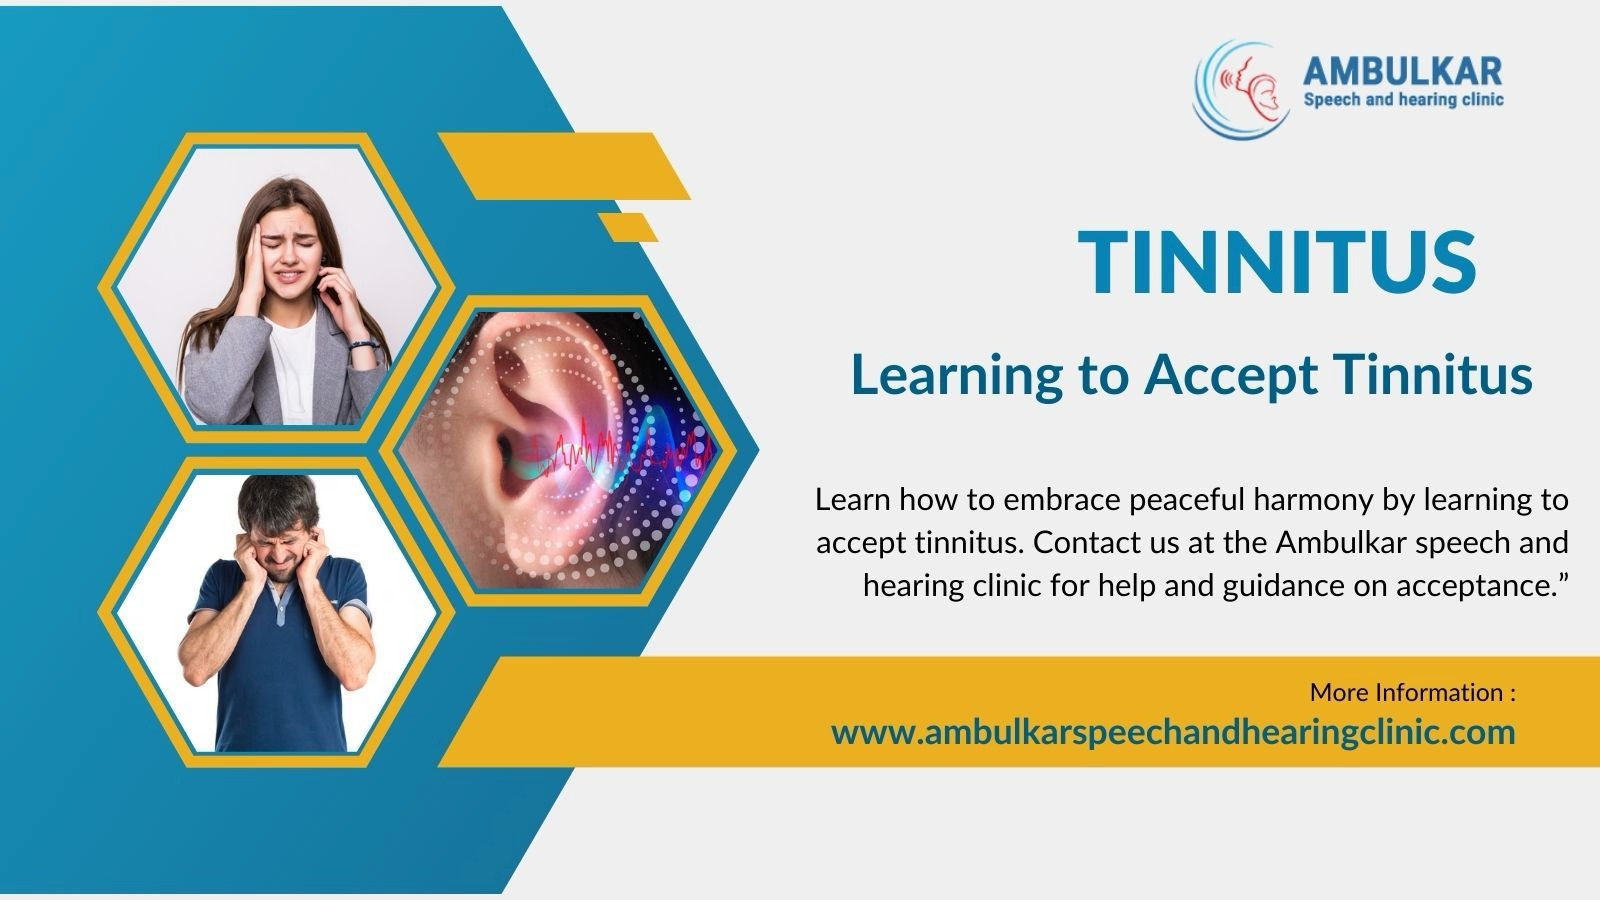 Hearing Aids in pune